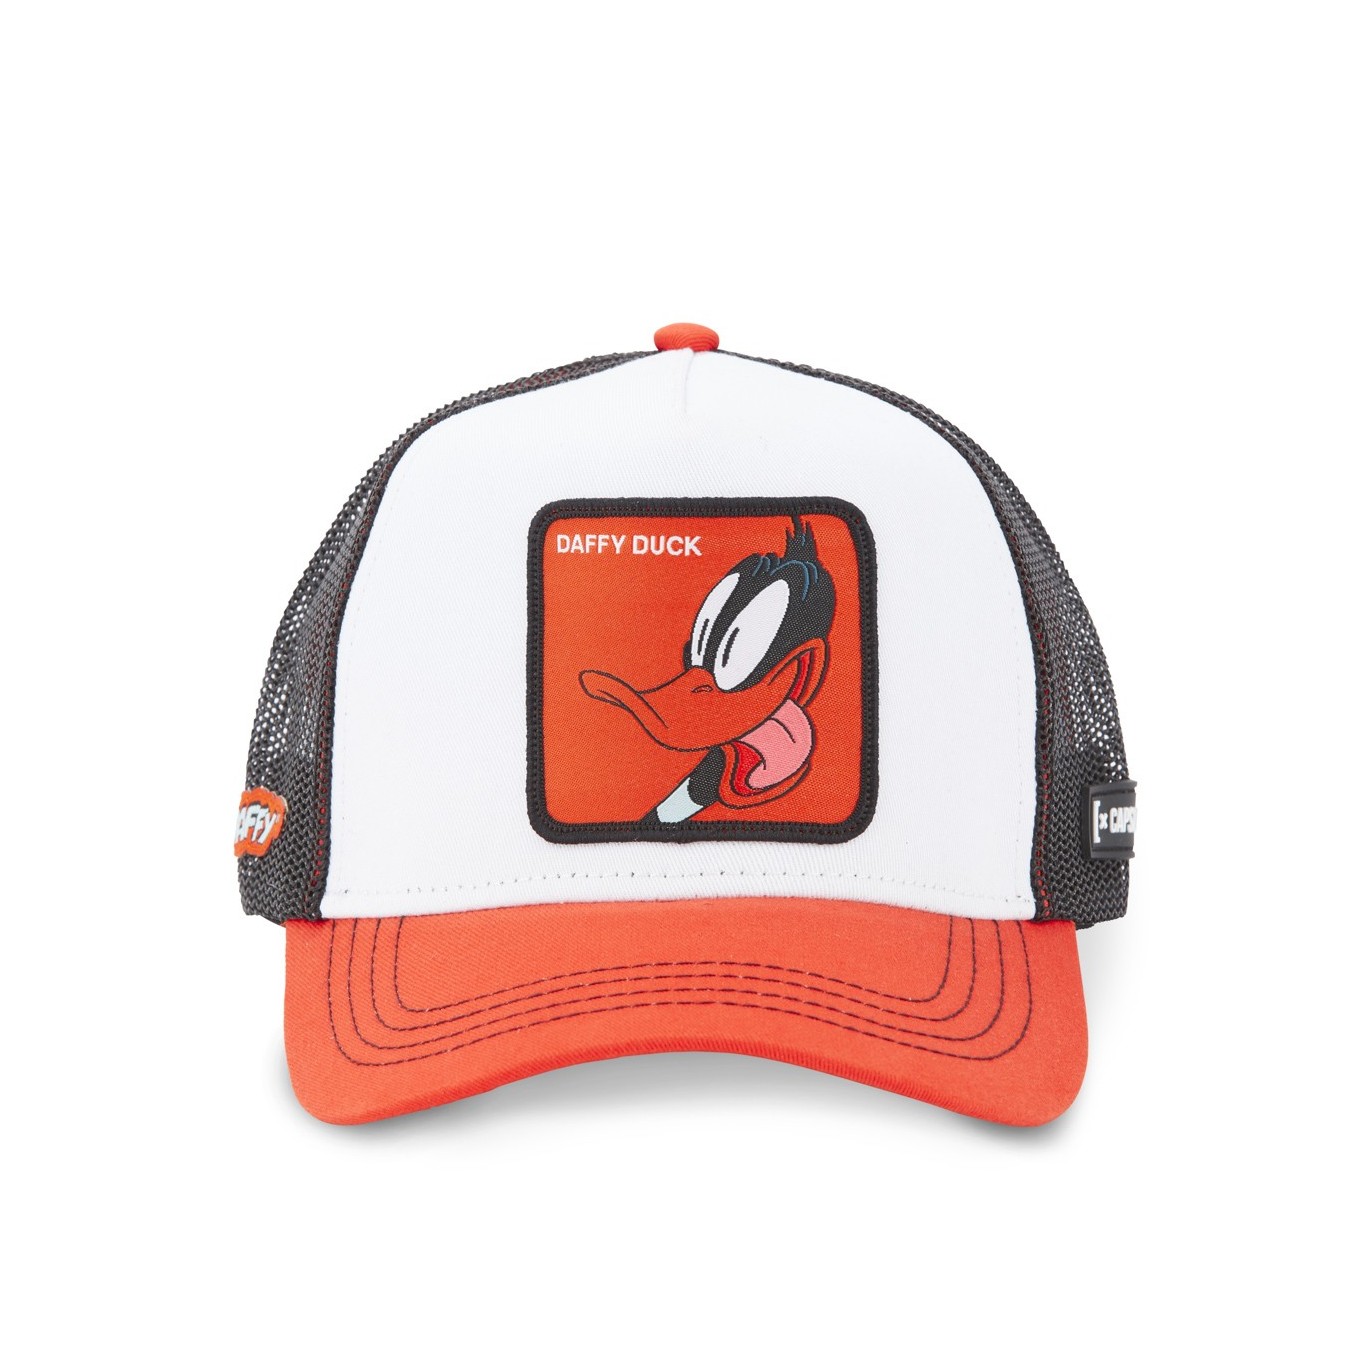 Casquette homme Looney Tunes Daffy - Capslab